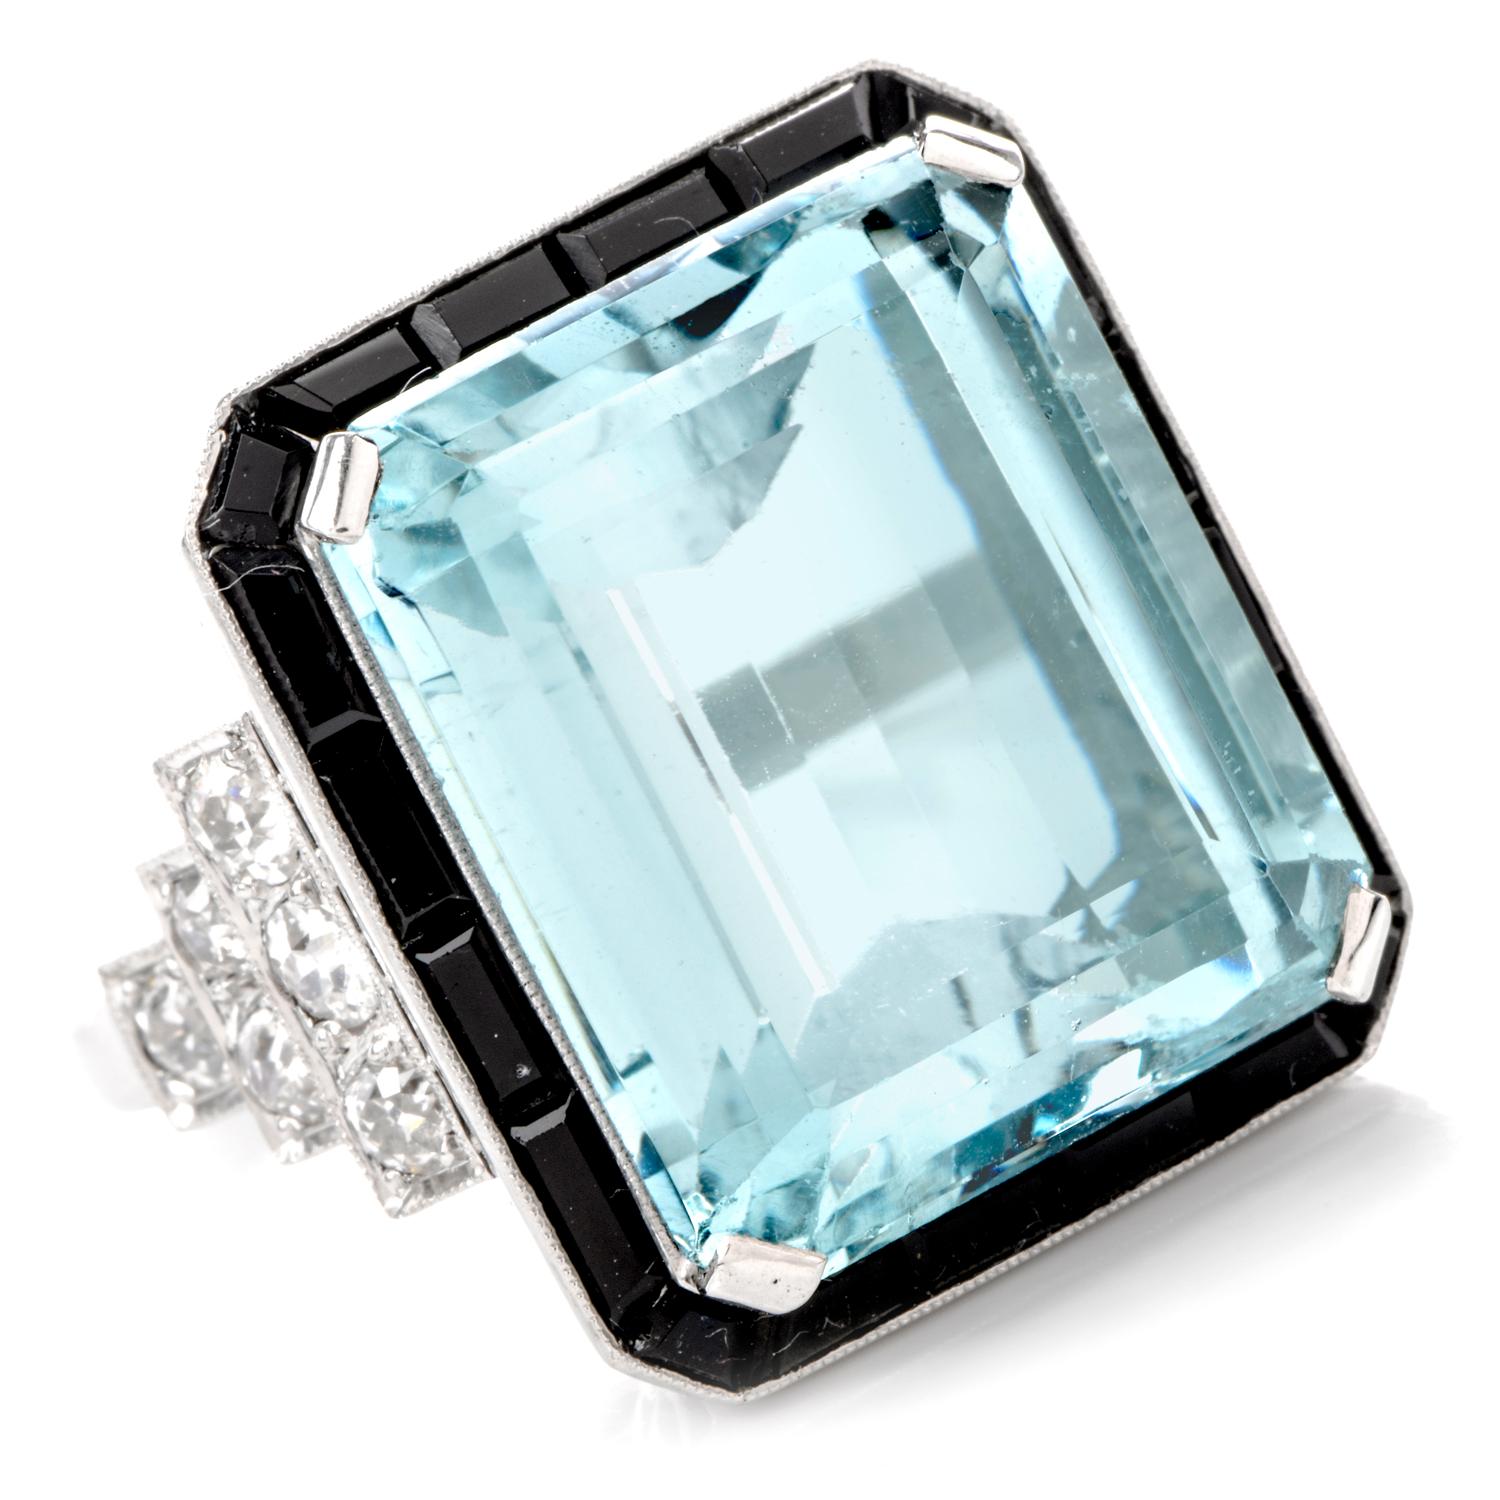 This 1960's Vintage Diamond Aquamarine Onyx ring is inspired in Art Deco and hand crafted in Platinum. Prominently featured in the center is an approximately 28.10 carats of flawless genuine Aquamarine. It is surrounded by channel set rectangular